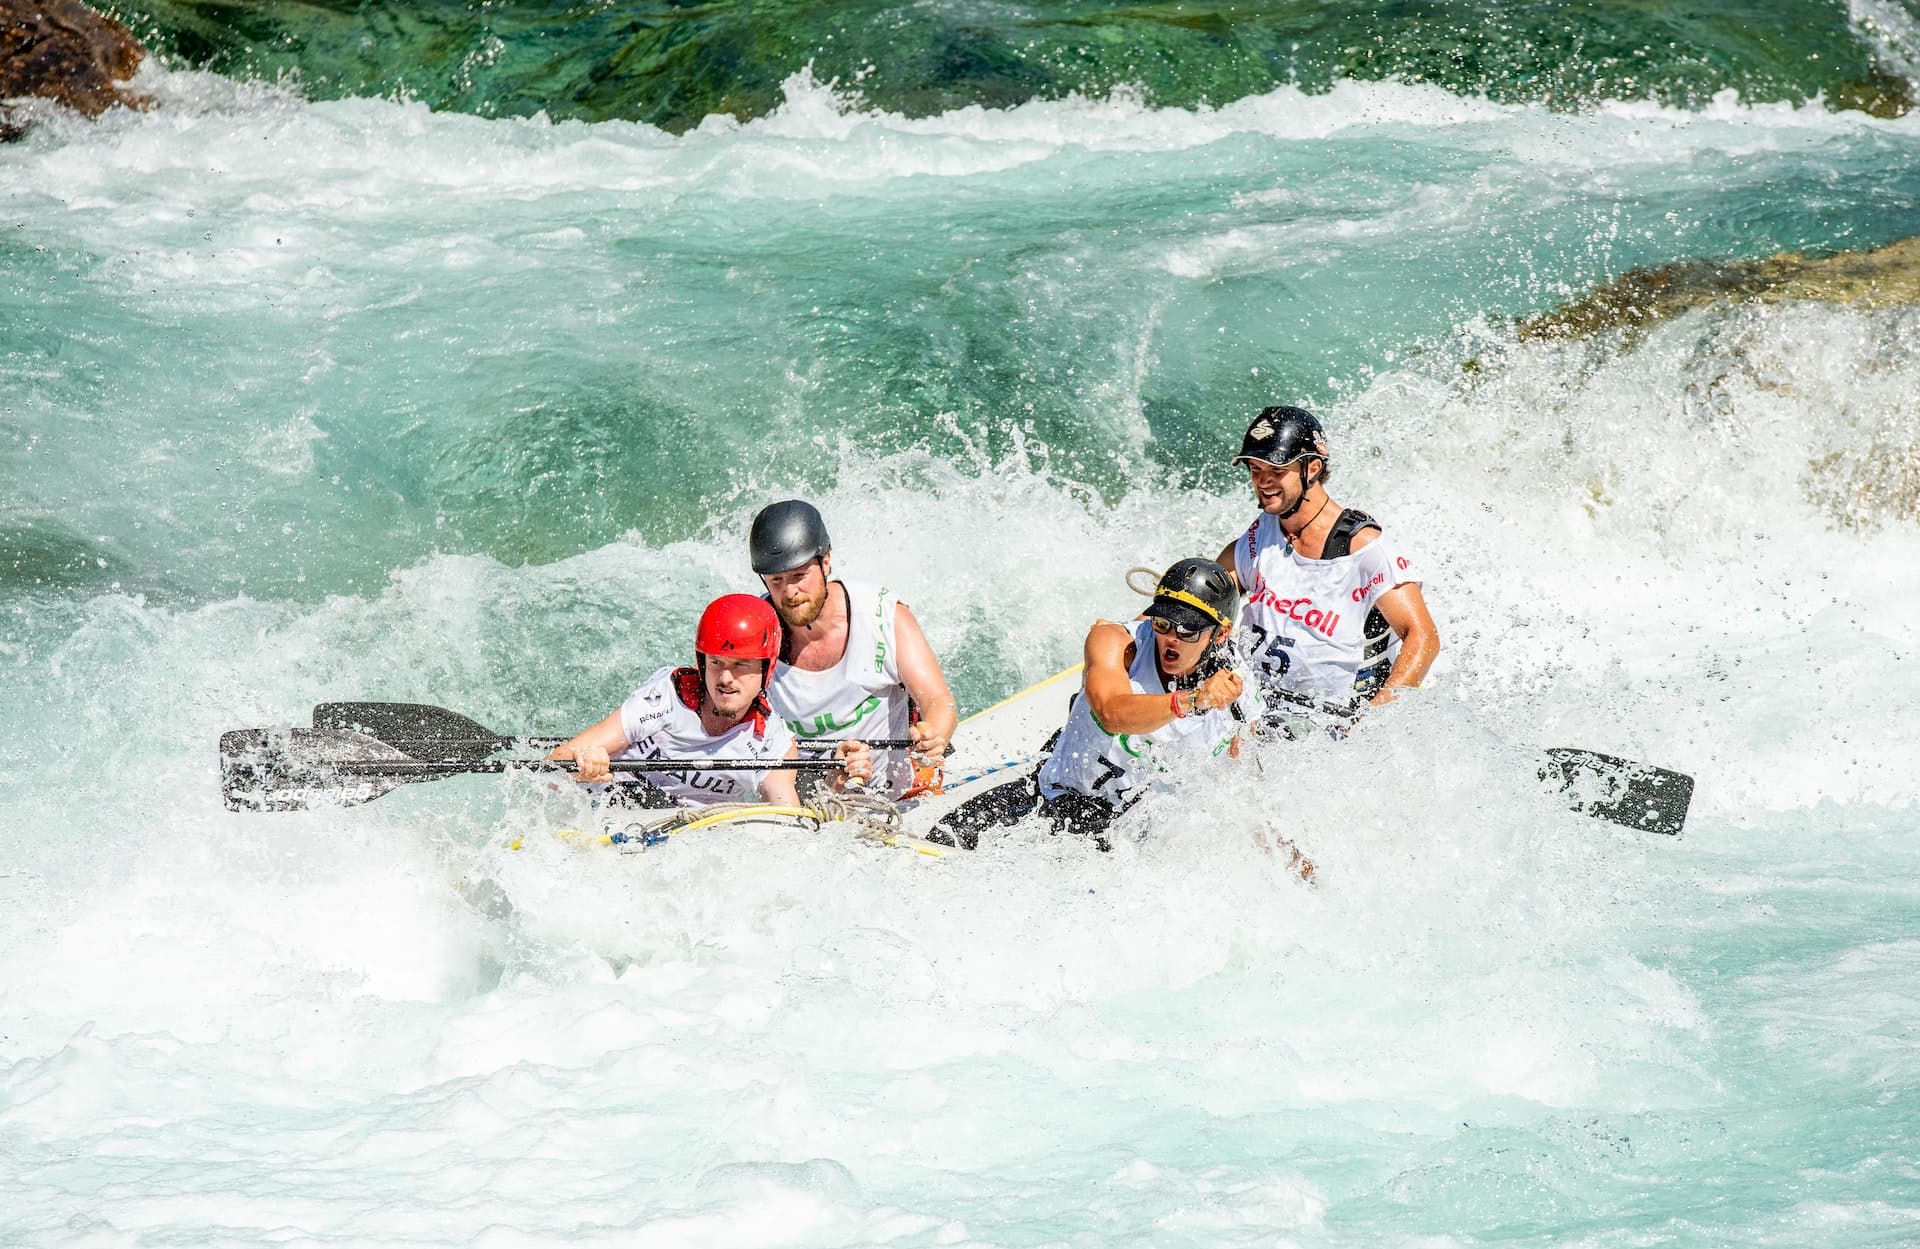 Group of four rafting rapids in Voss, Europe's adventure sports capital